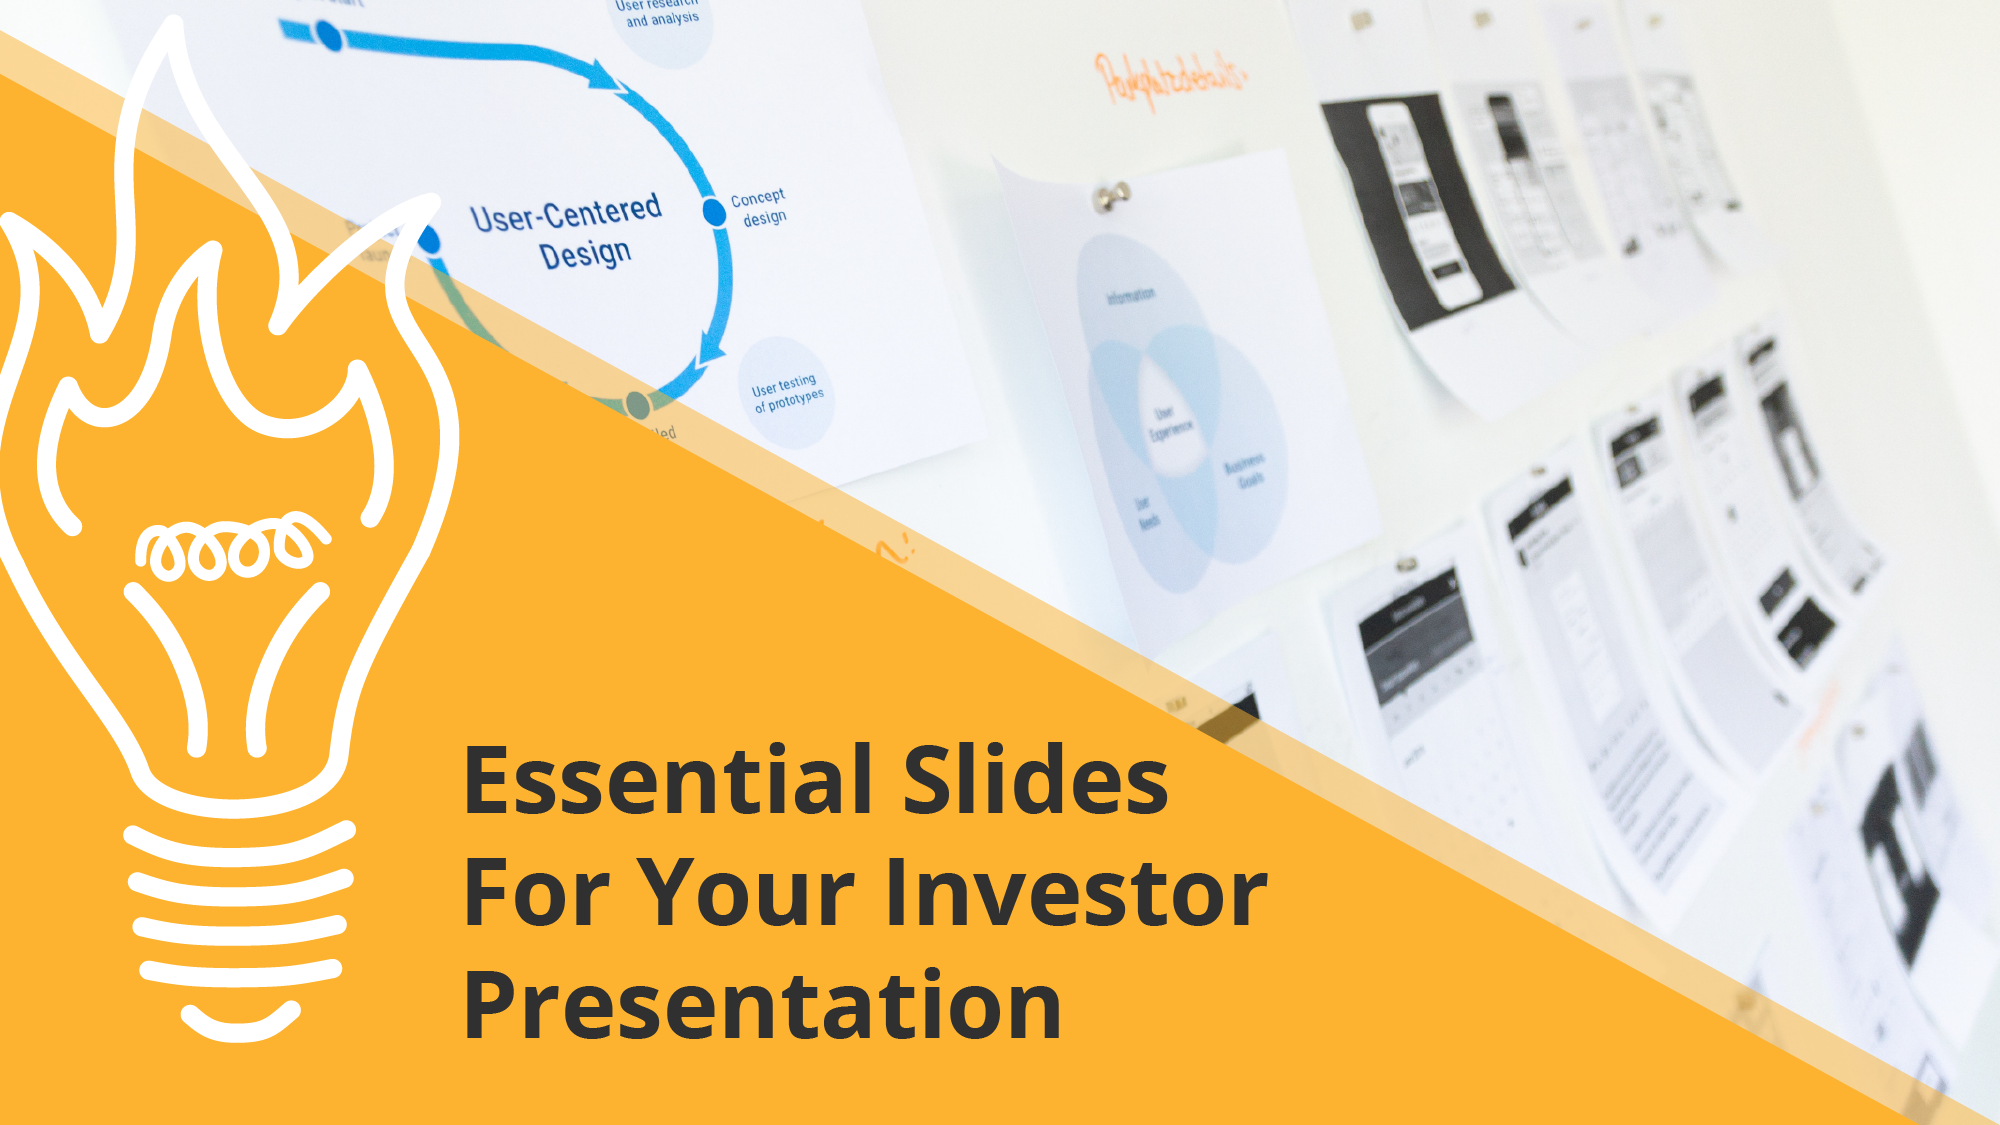 Essential Slides for pitching investors